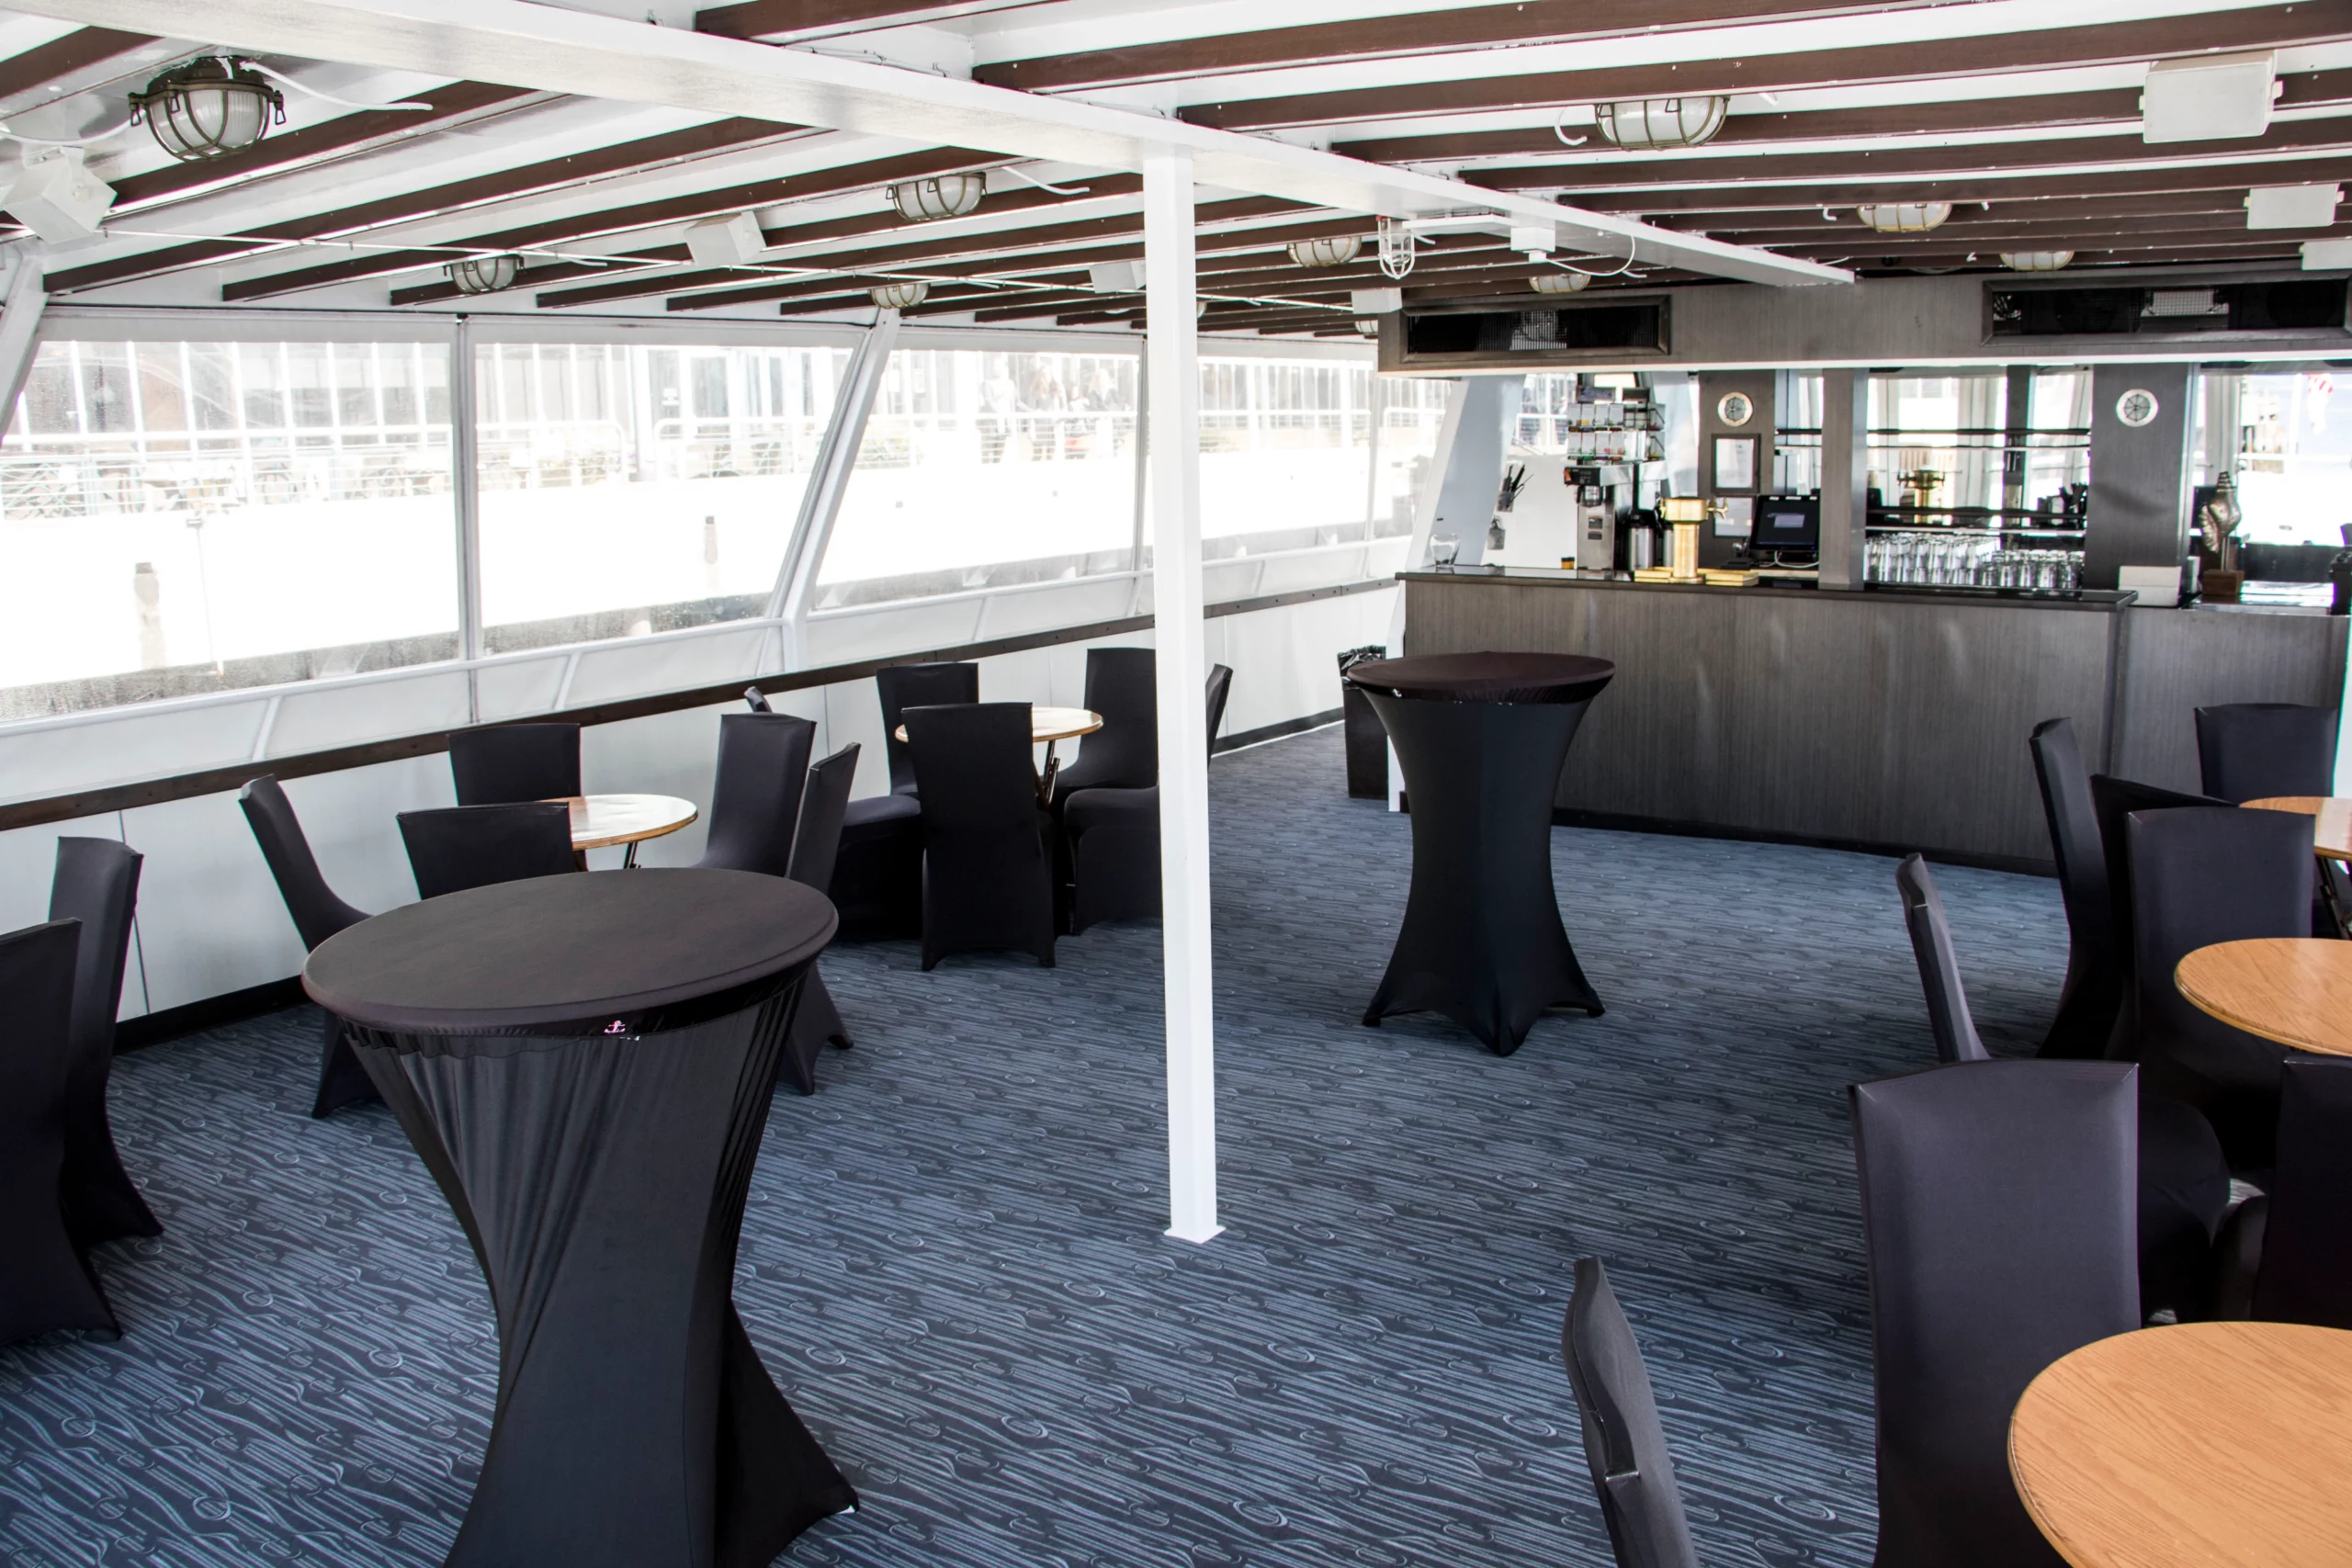 Extended view of the Argosy Cruises private charter bar and dining area, with tables and chairs.